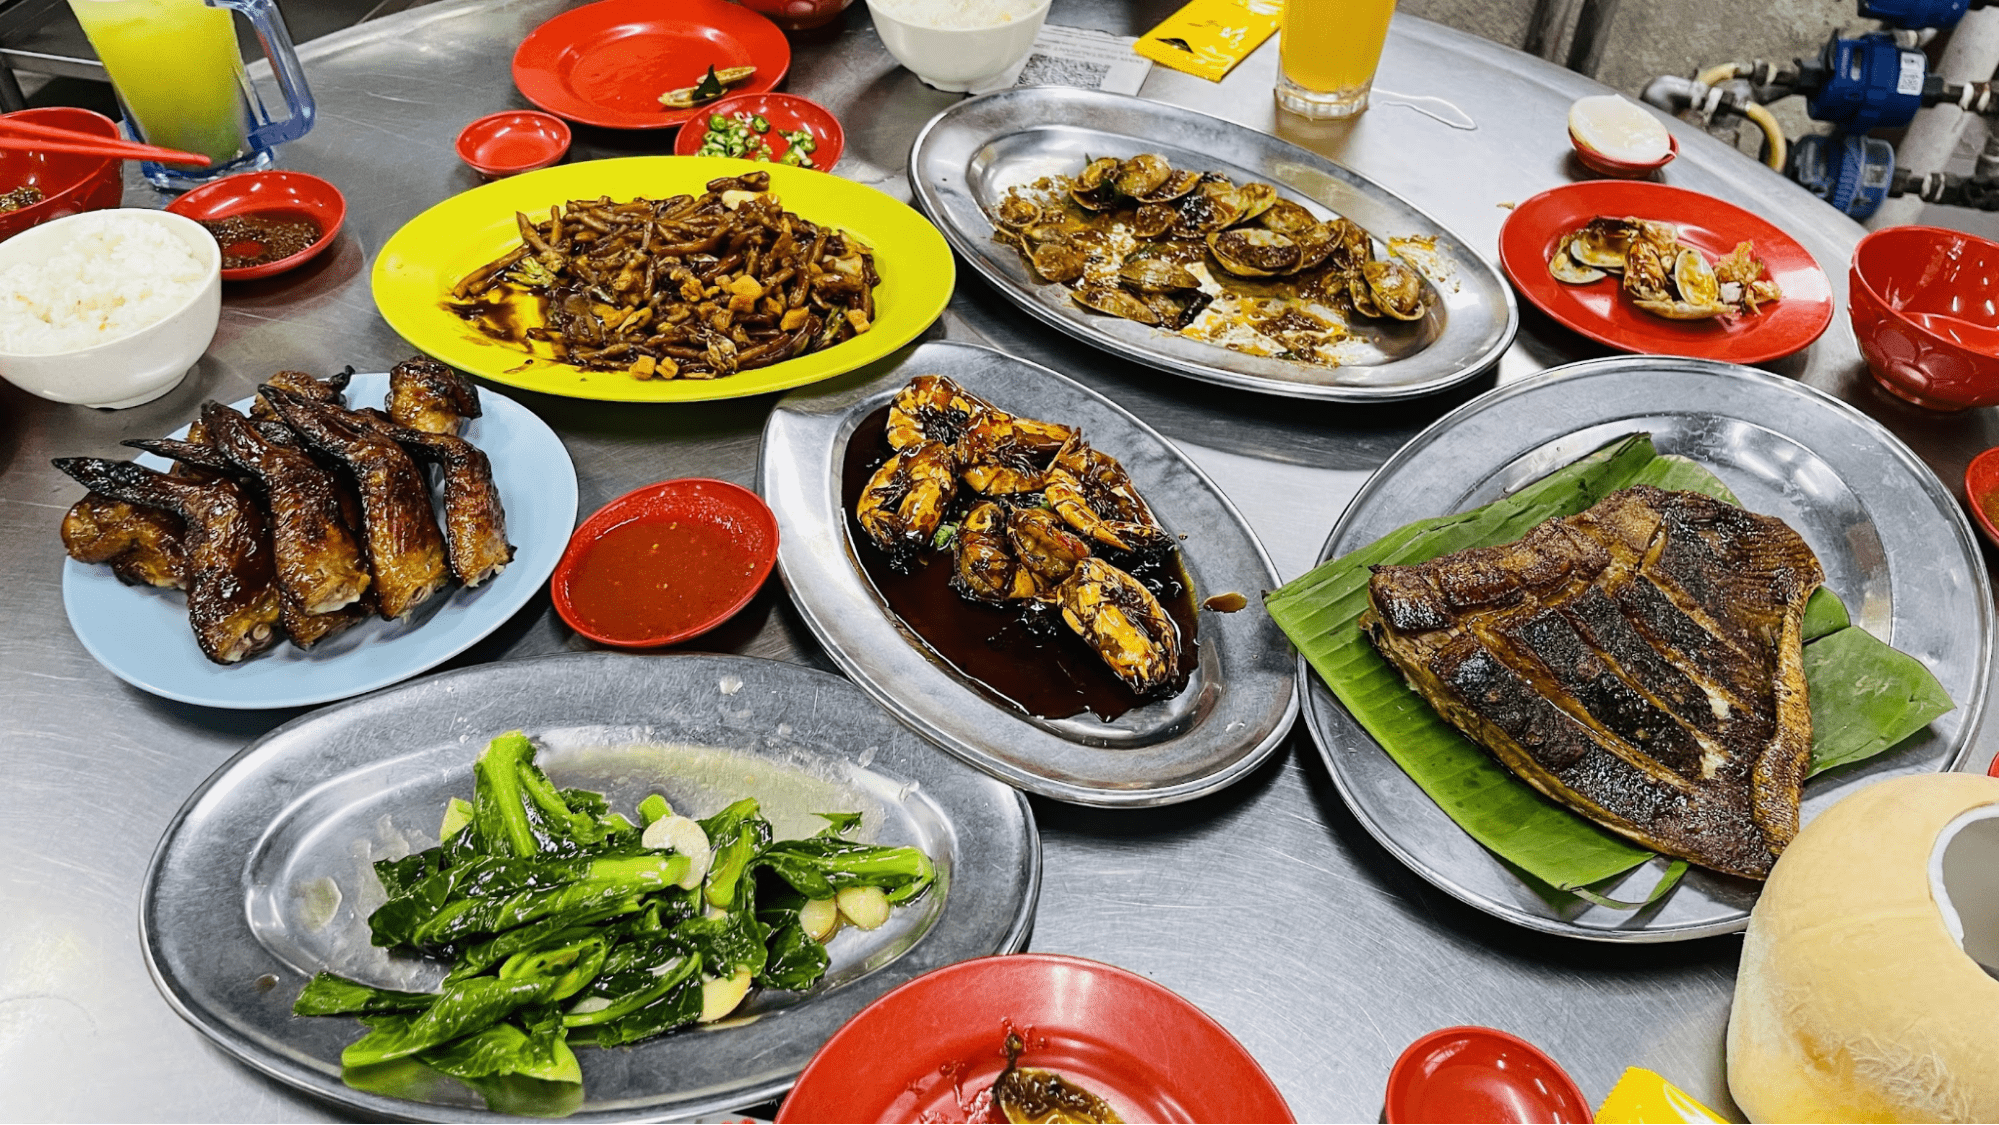 Supper places in KL - Chinese food